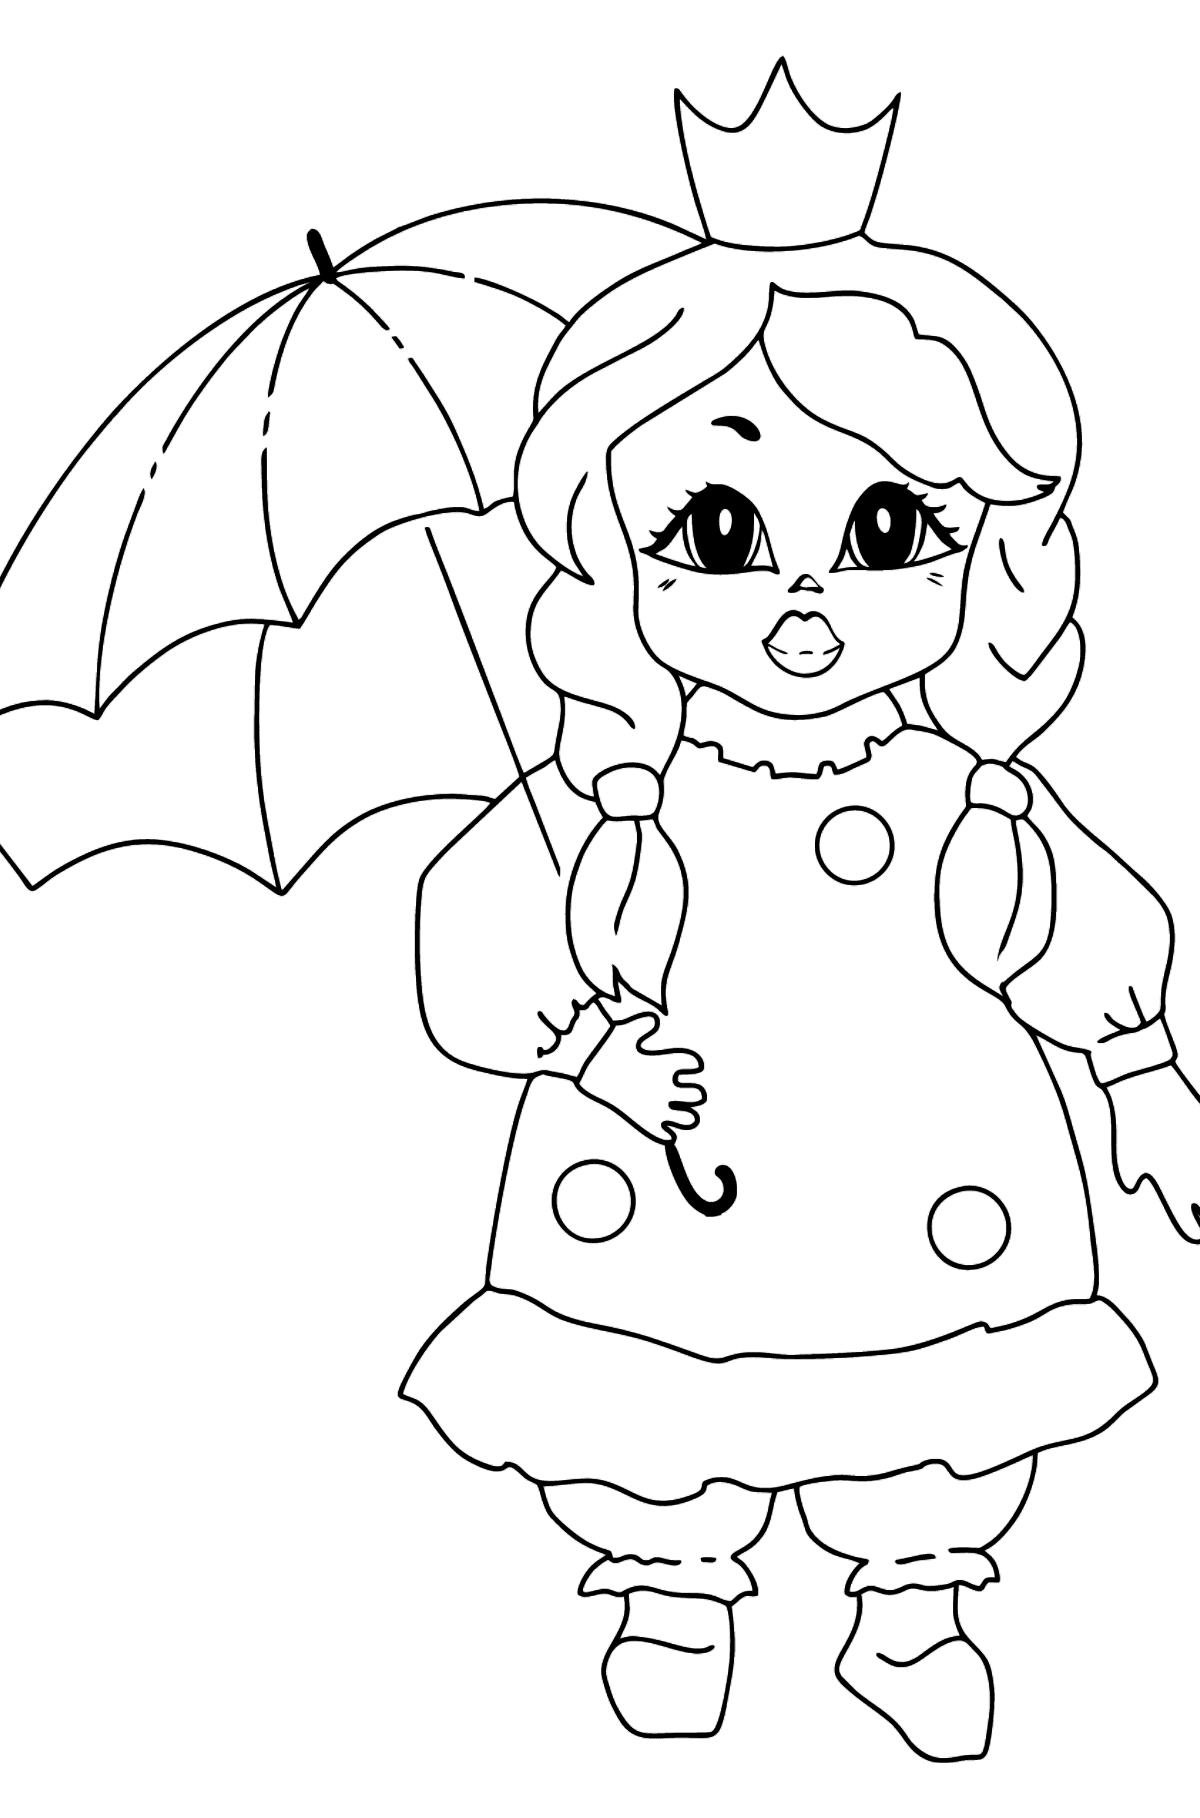 Coloring Page - A Princess with an Umbrella - Coloring Pages for Kids